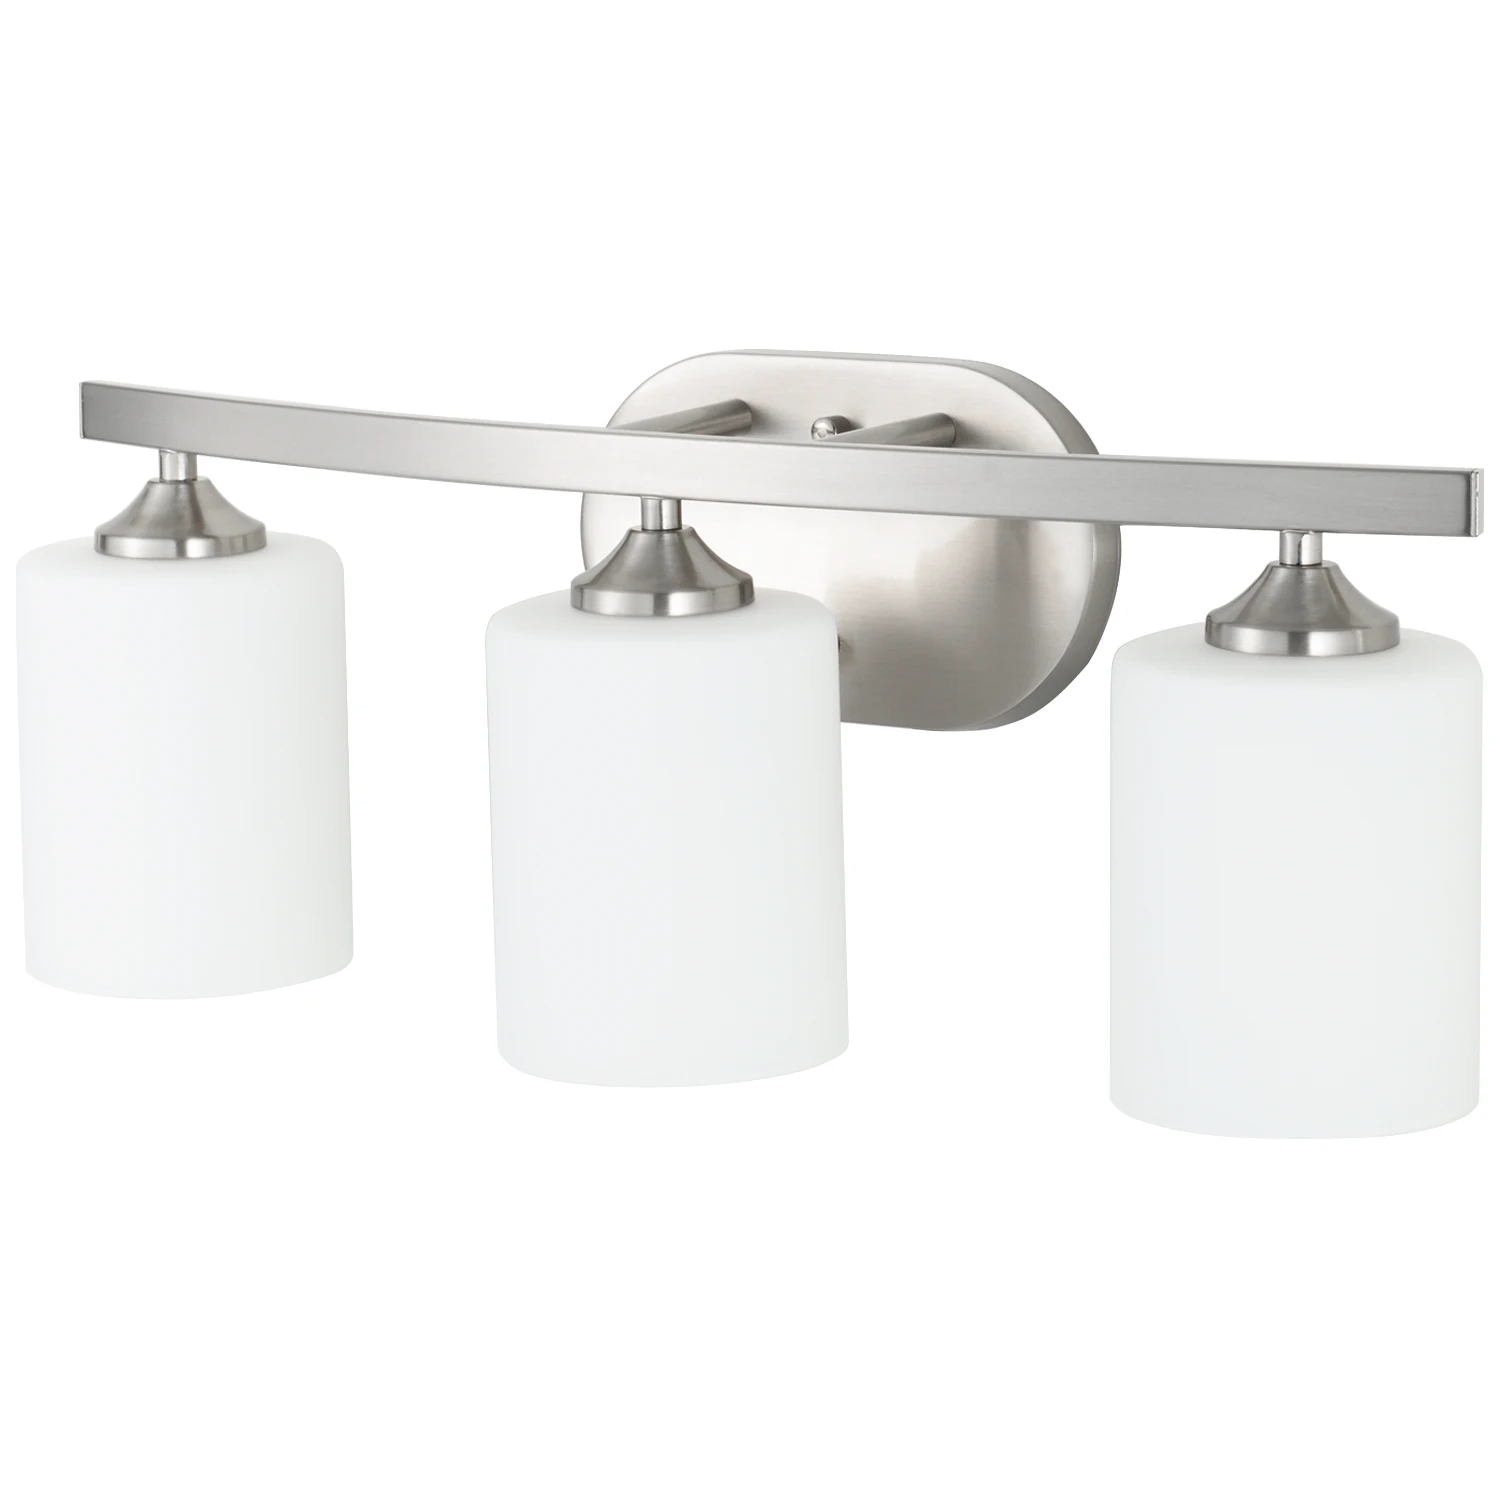 

Delity Bathroom Lighting Fixtures Over Mirror Bath Vanity Lights in Brushed Nickel with White Glass Shades